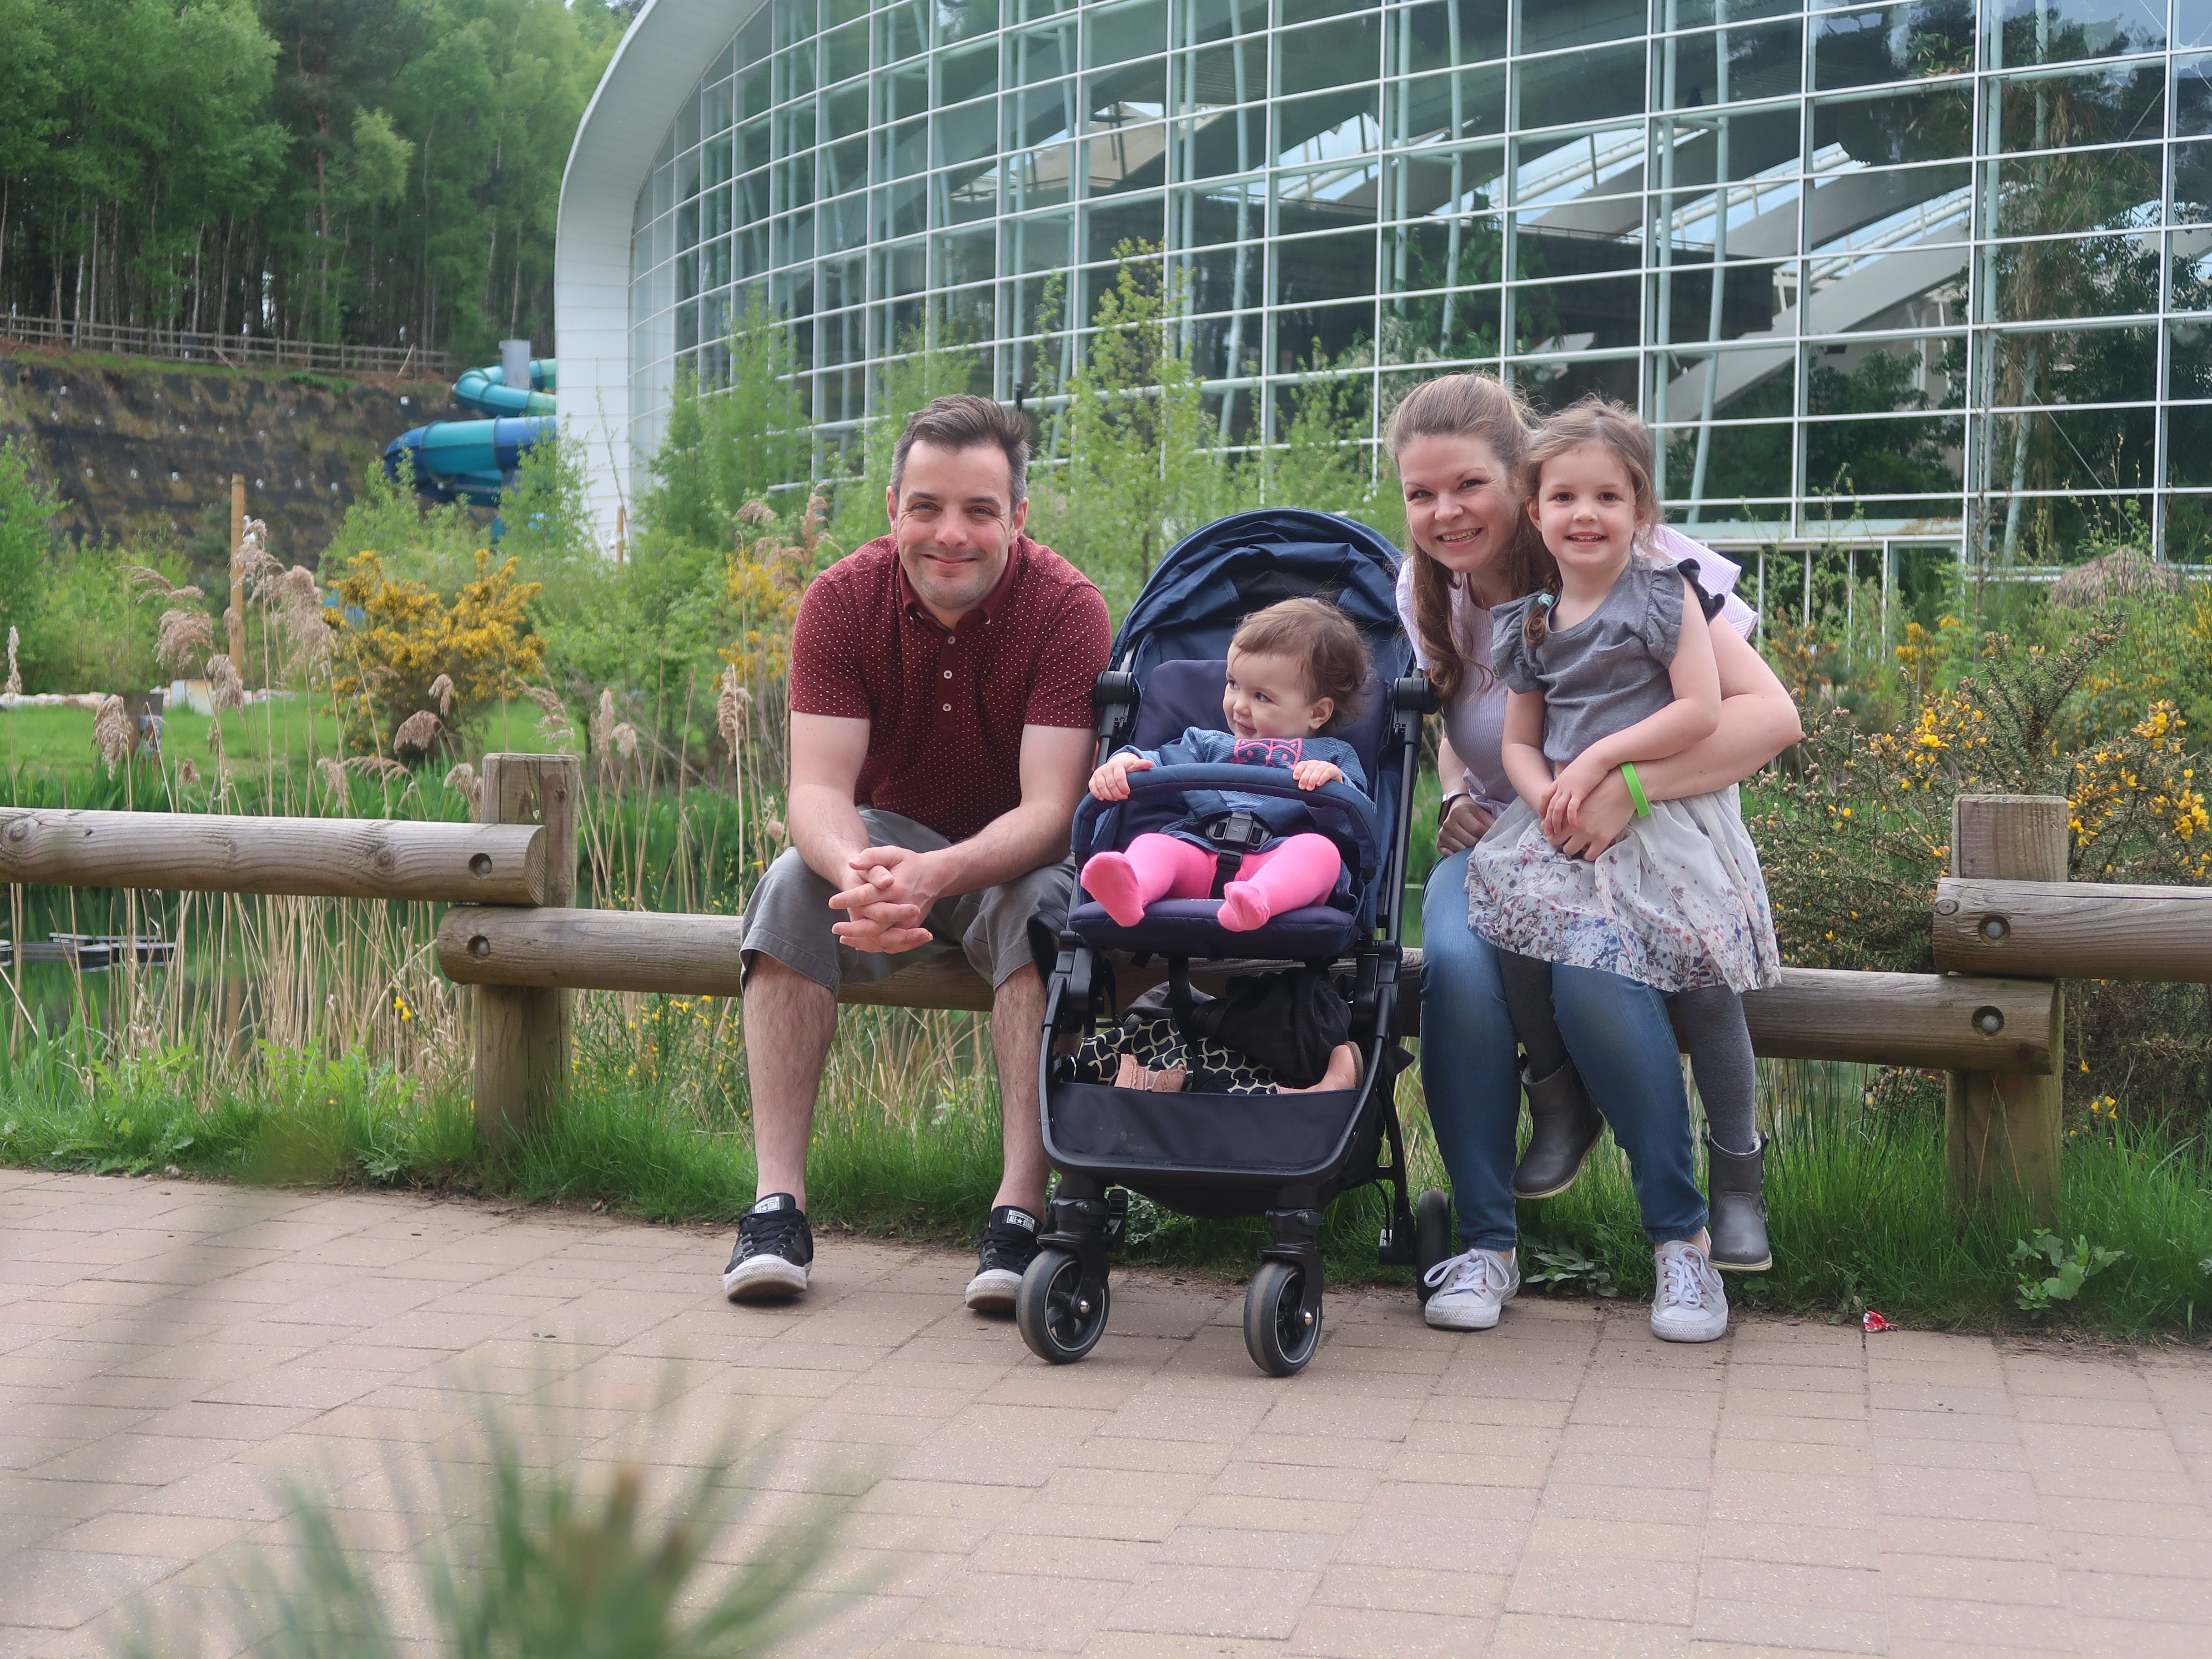 Our Family Break at Center Parcs Woburn Forest